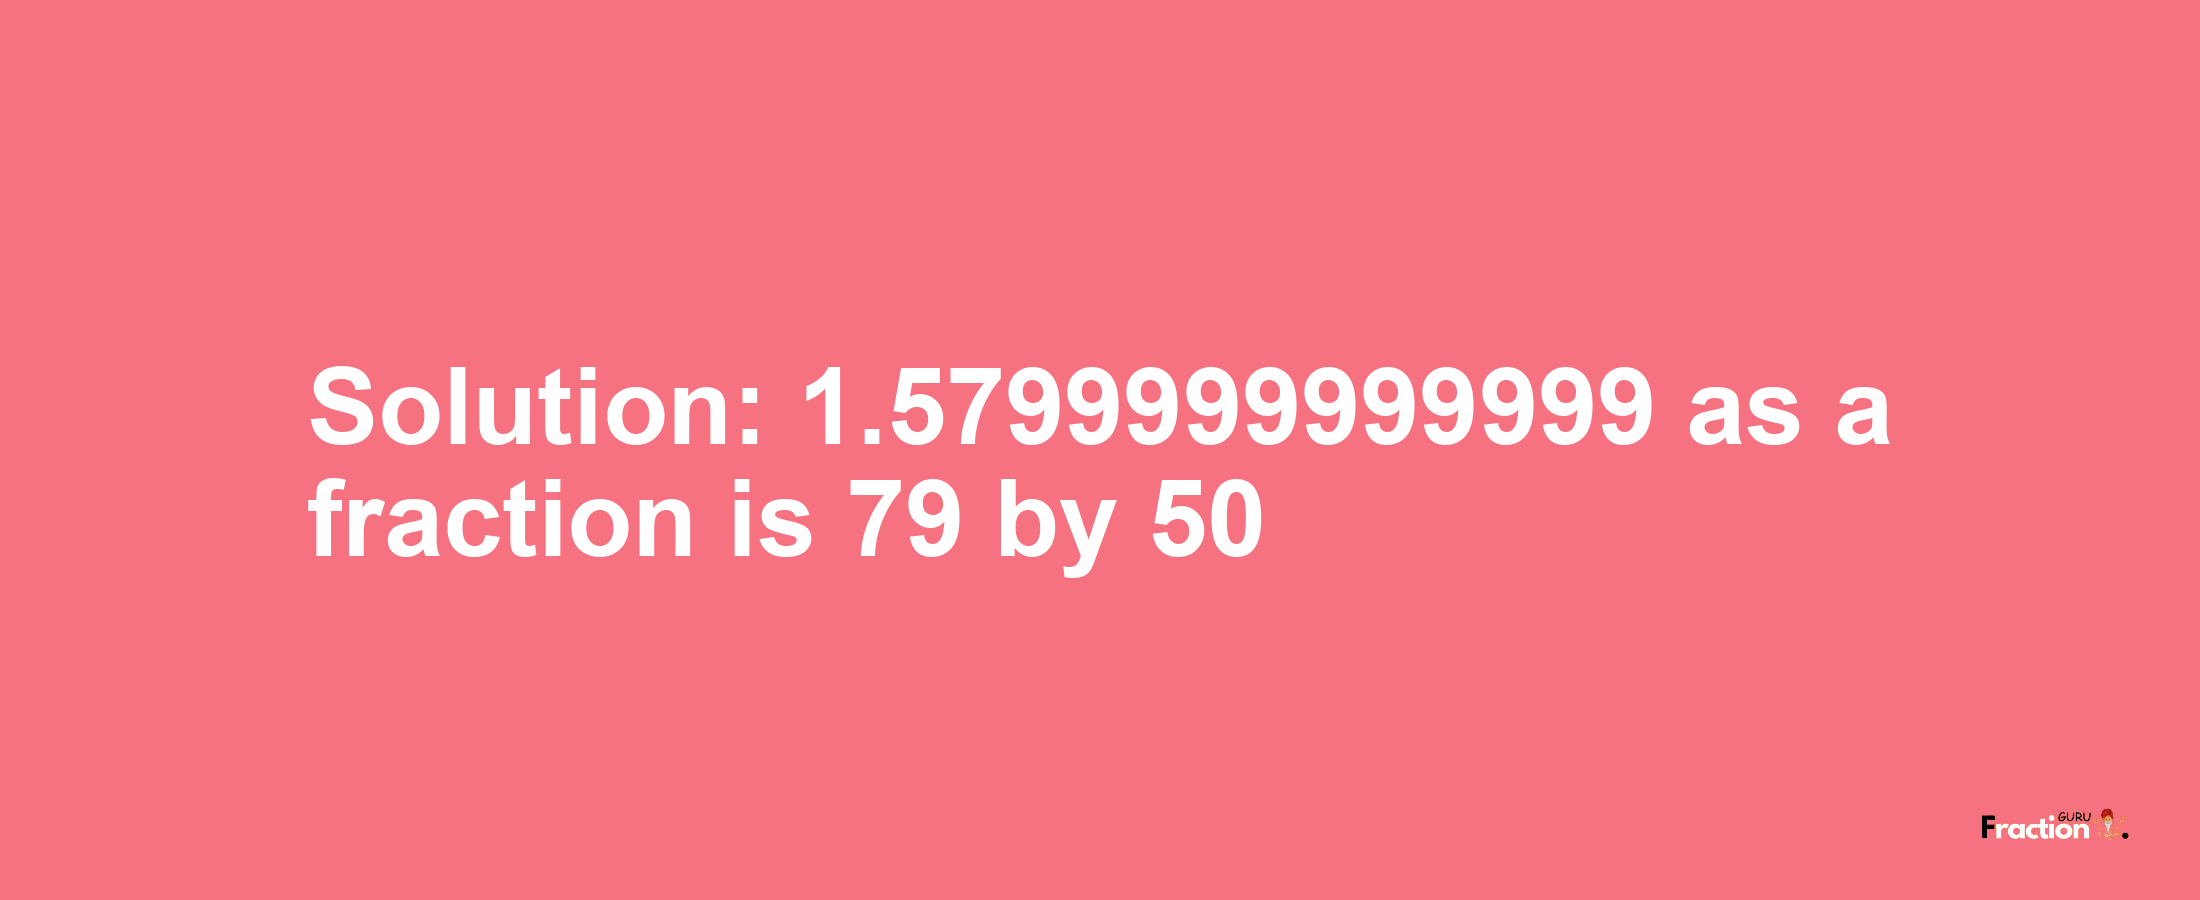 Solution:1.5799999999999 as a fraction is 79/50